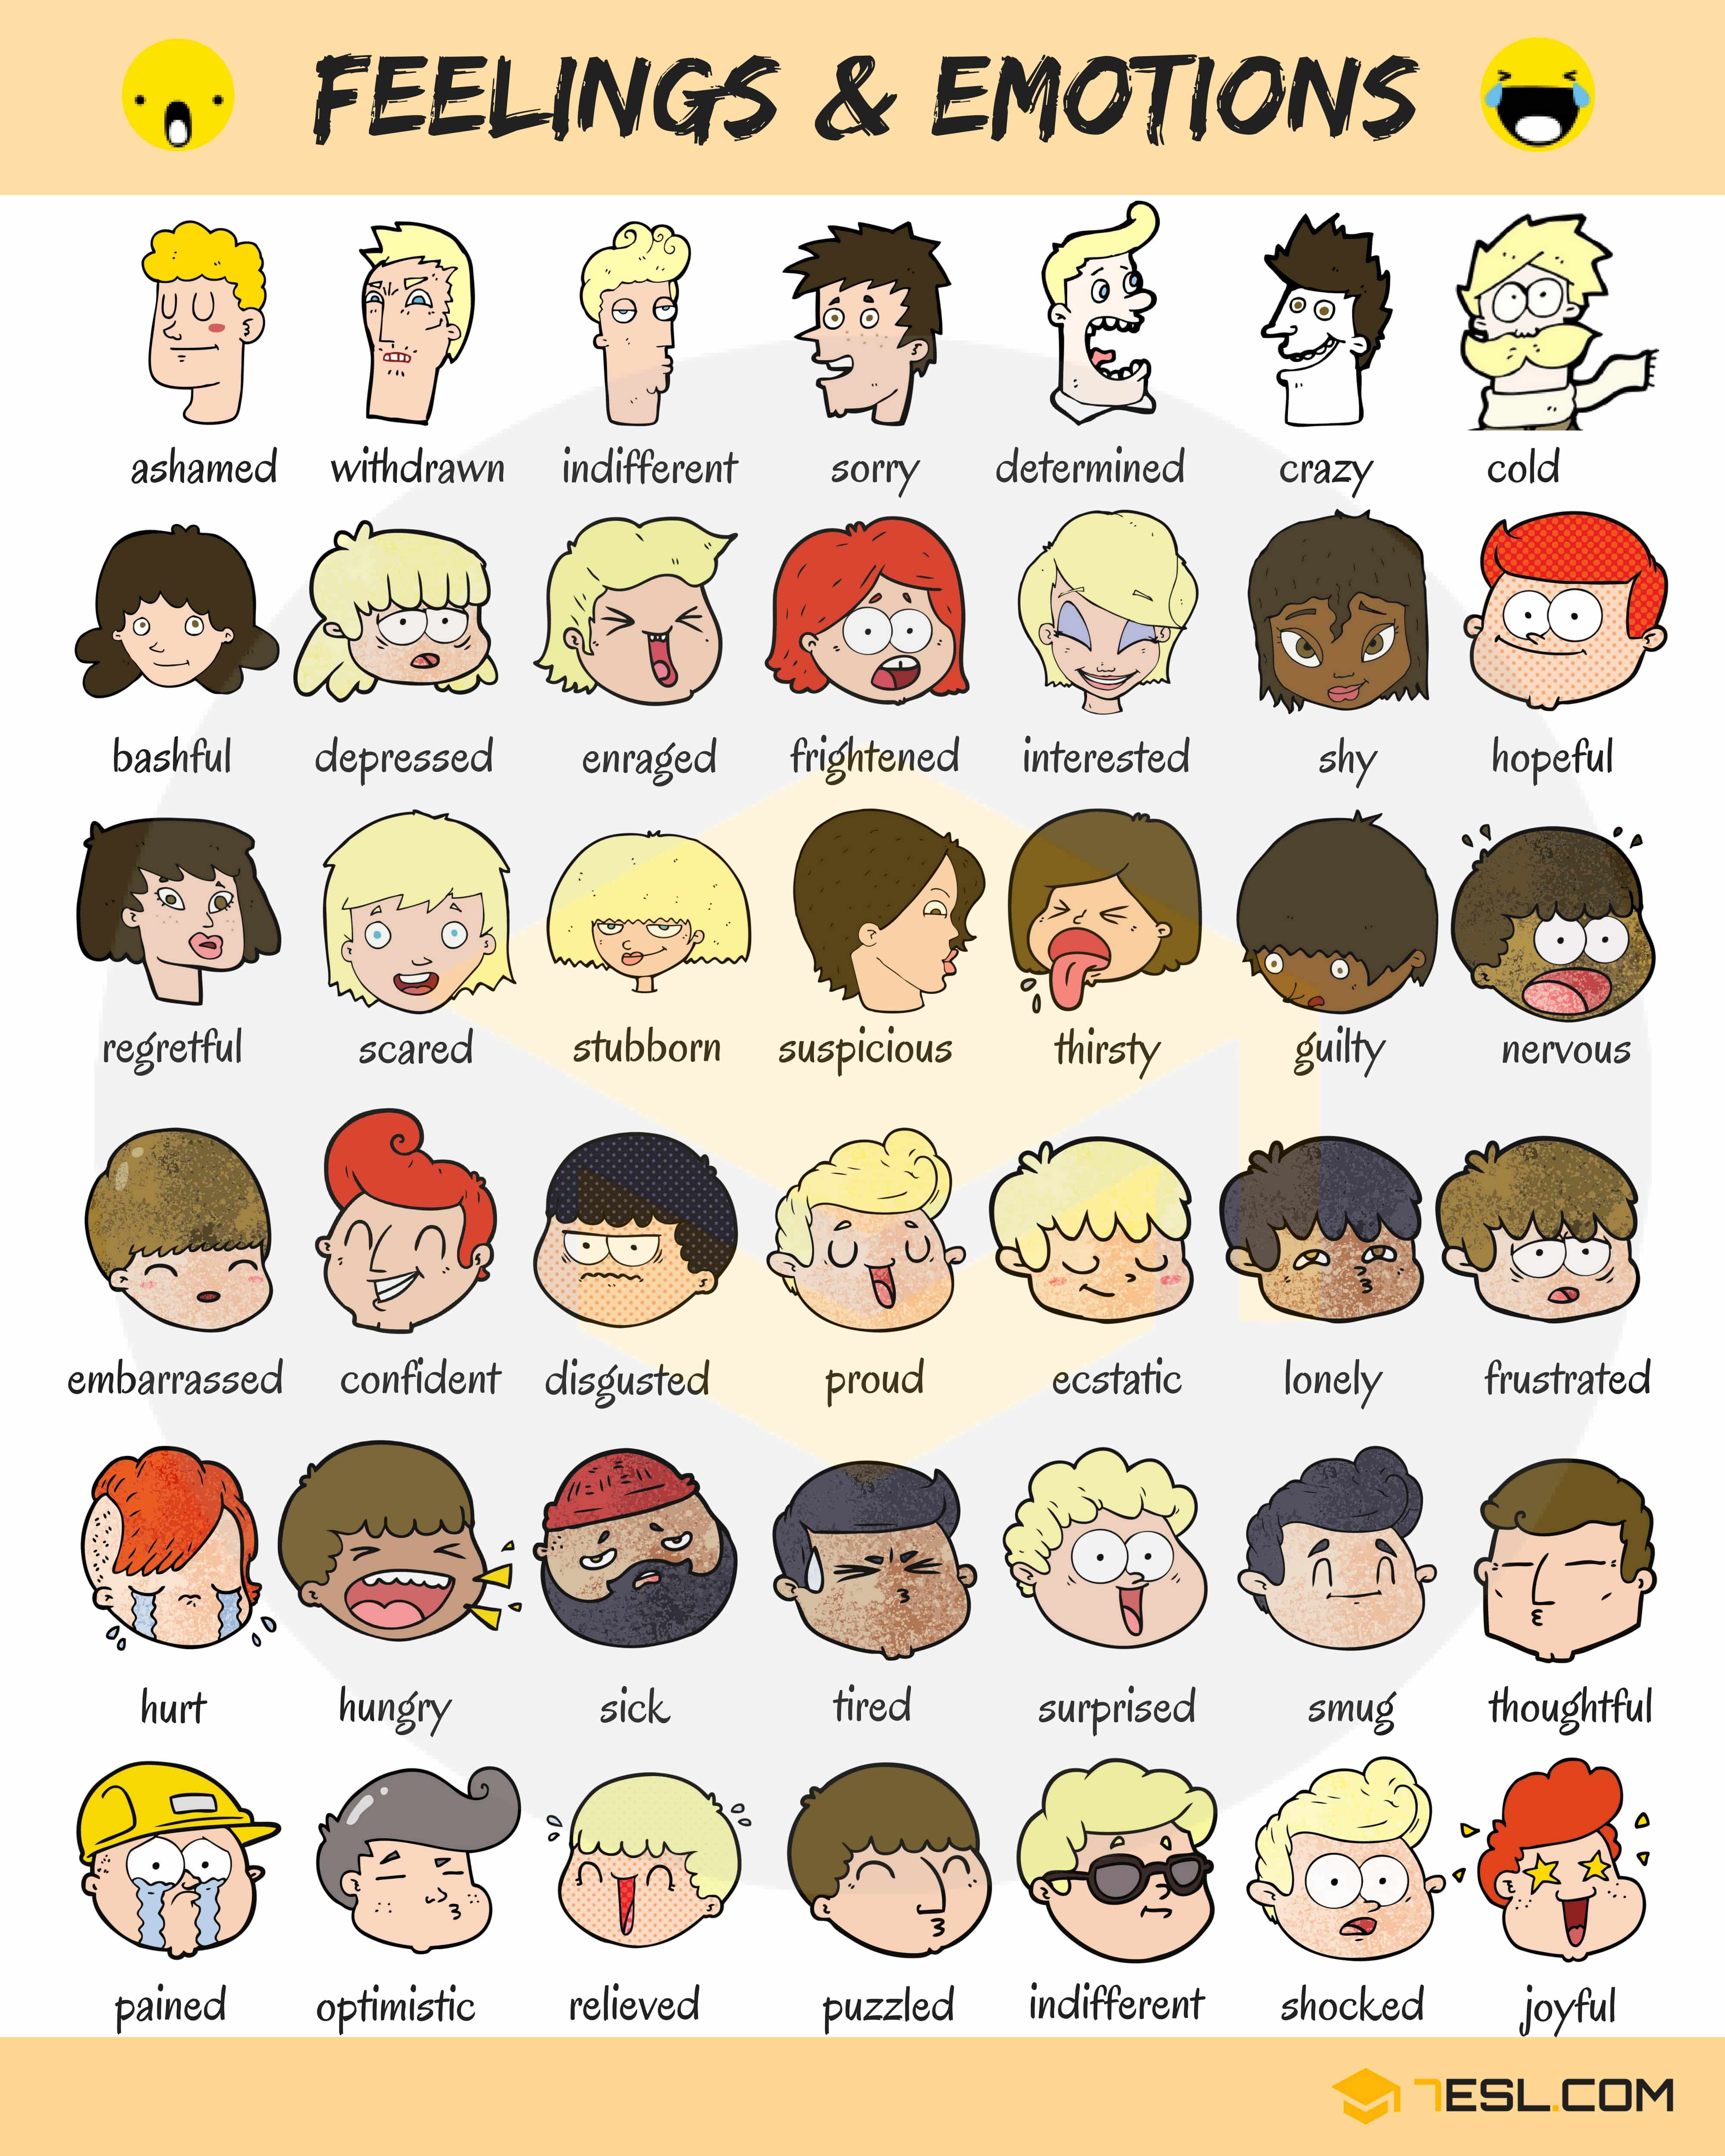 emotions clipart feeling word